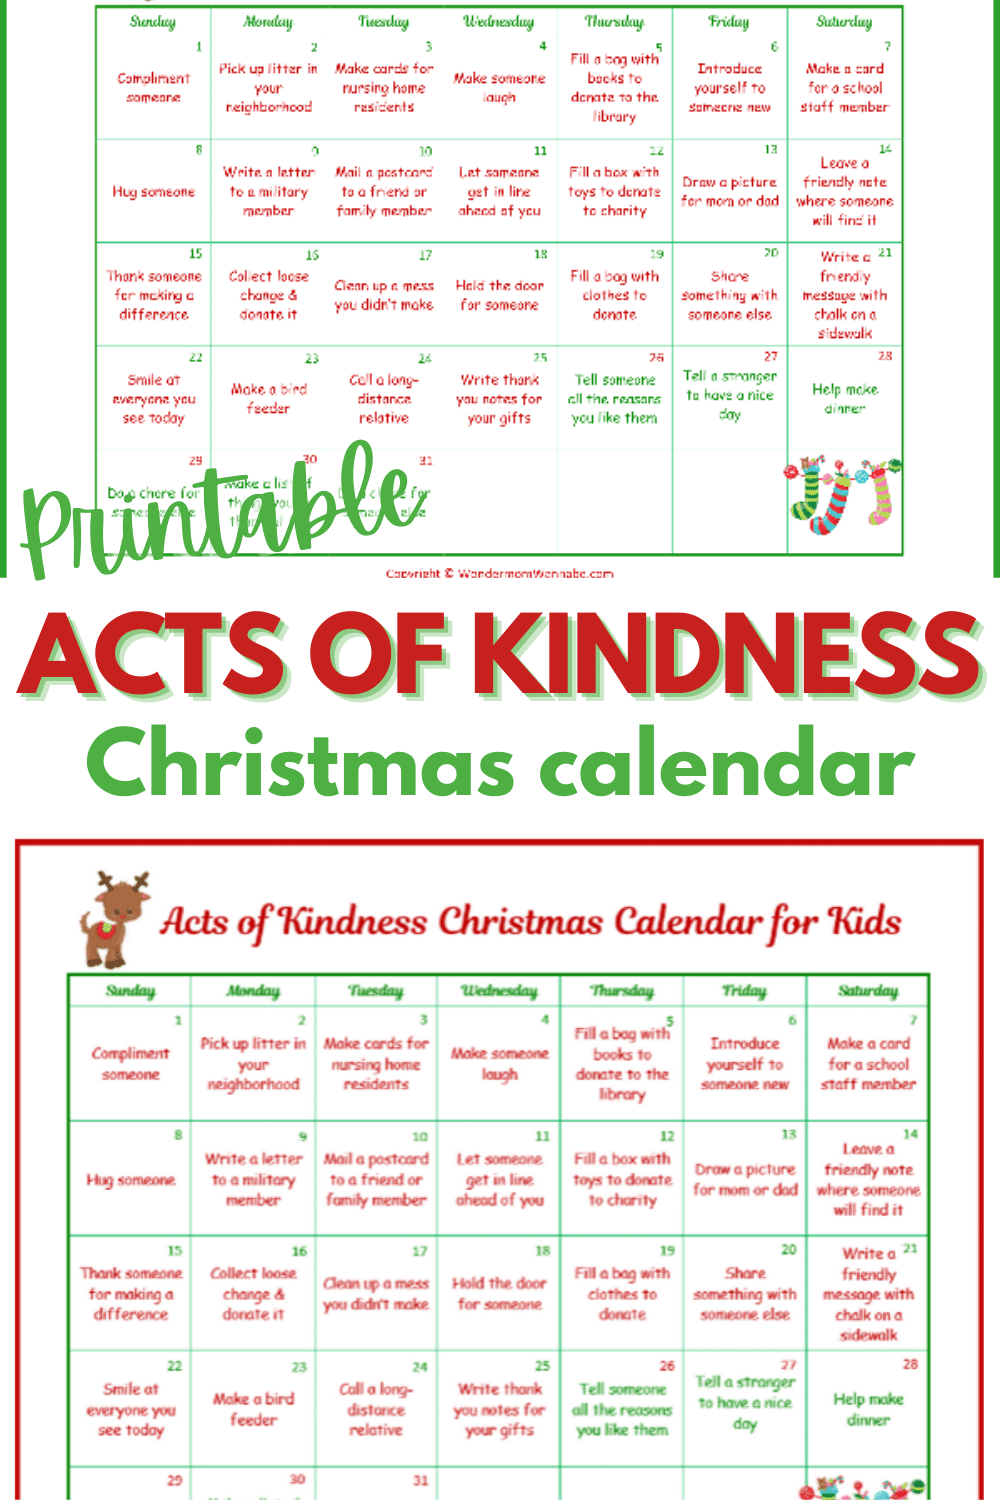 This random acts of kindness Christmas calendar is designed just for kids! What a great way to show kids that you're never too young to make a positive impact. #printables #RAKprintables #Christmasprintables #Kidsprintables #Randomactsofkindness via @wondermomwannab